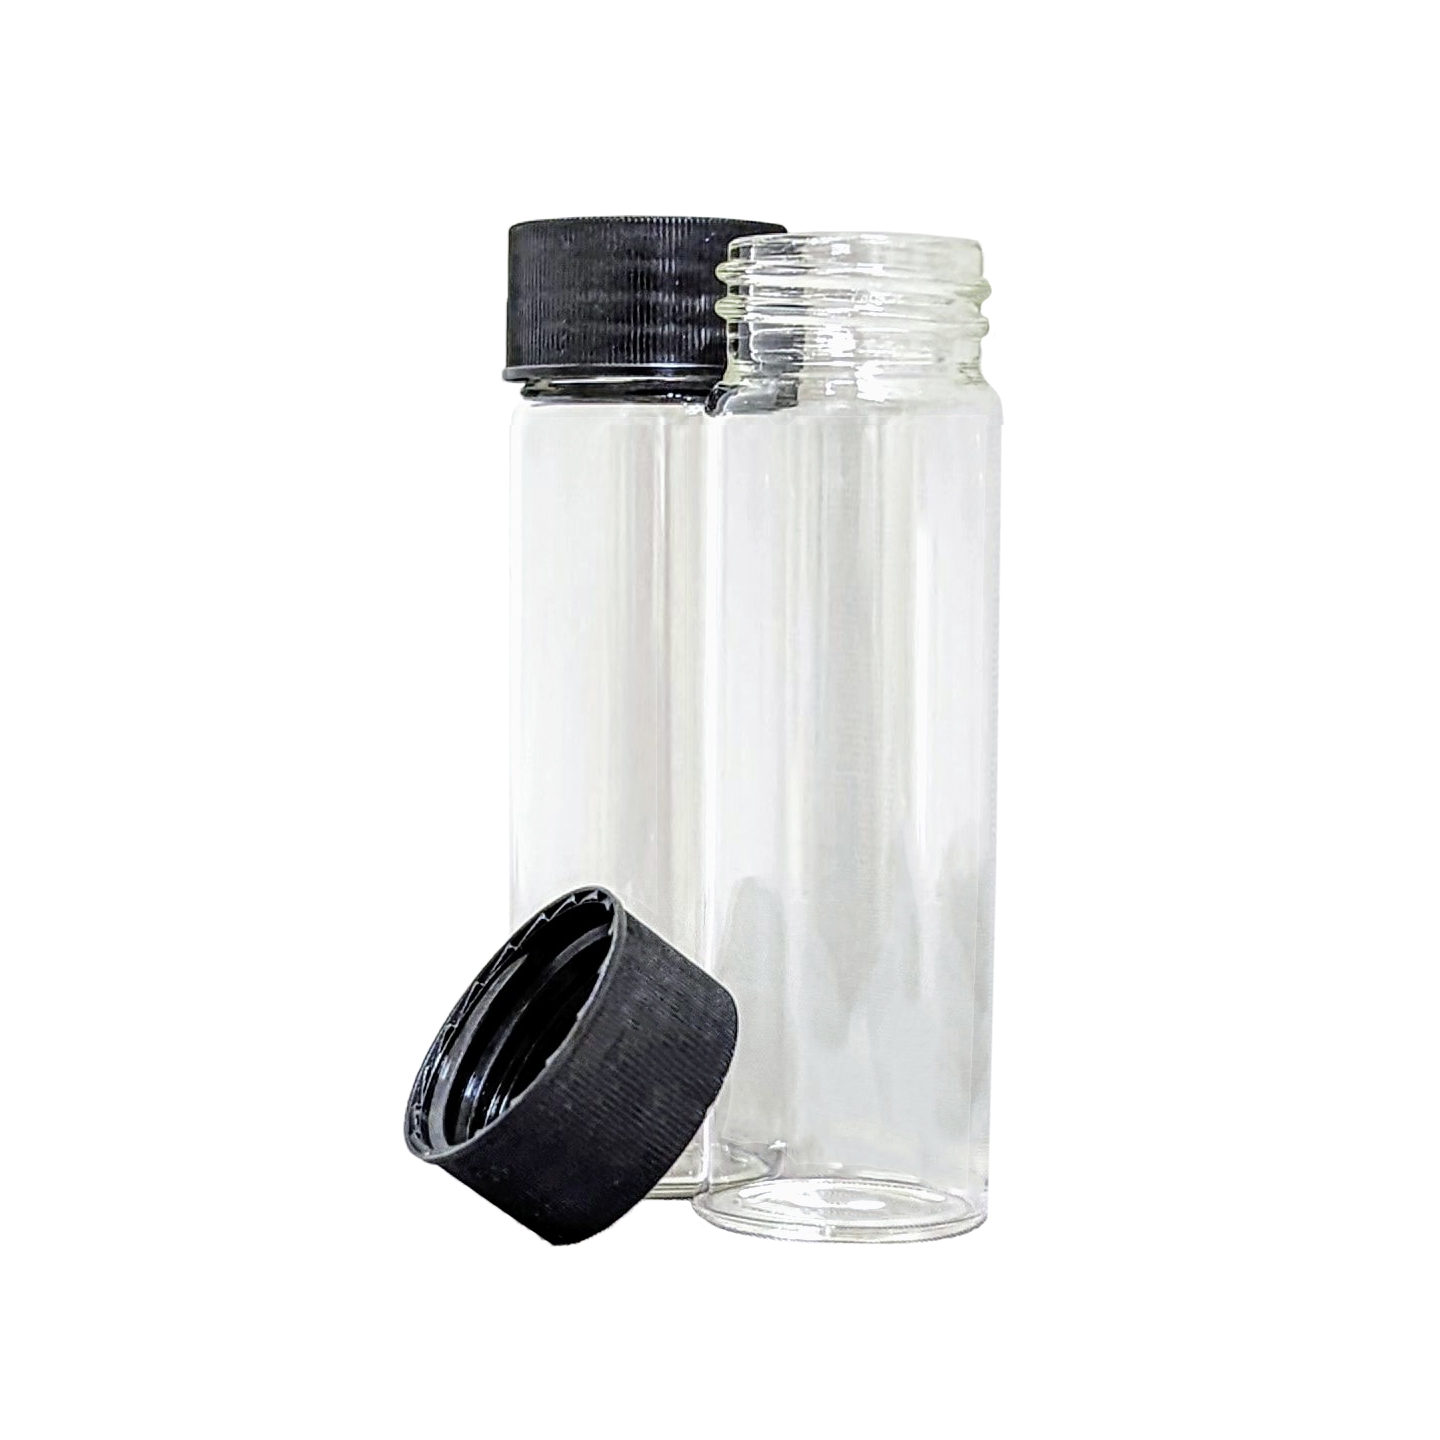 Vial, Screw Neck Vials, Tall Form, Capacity 28.2ml, With Unattached Polypropylene Closure